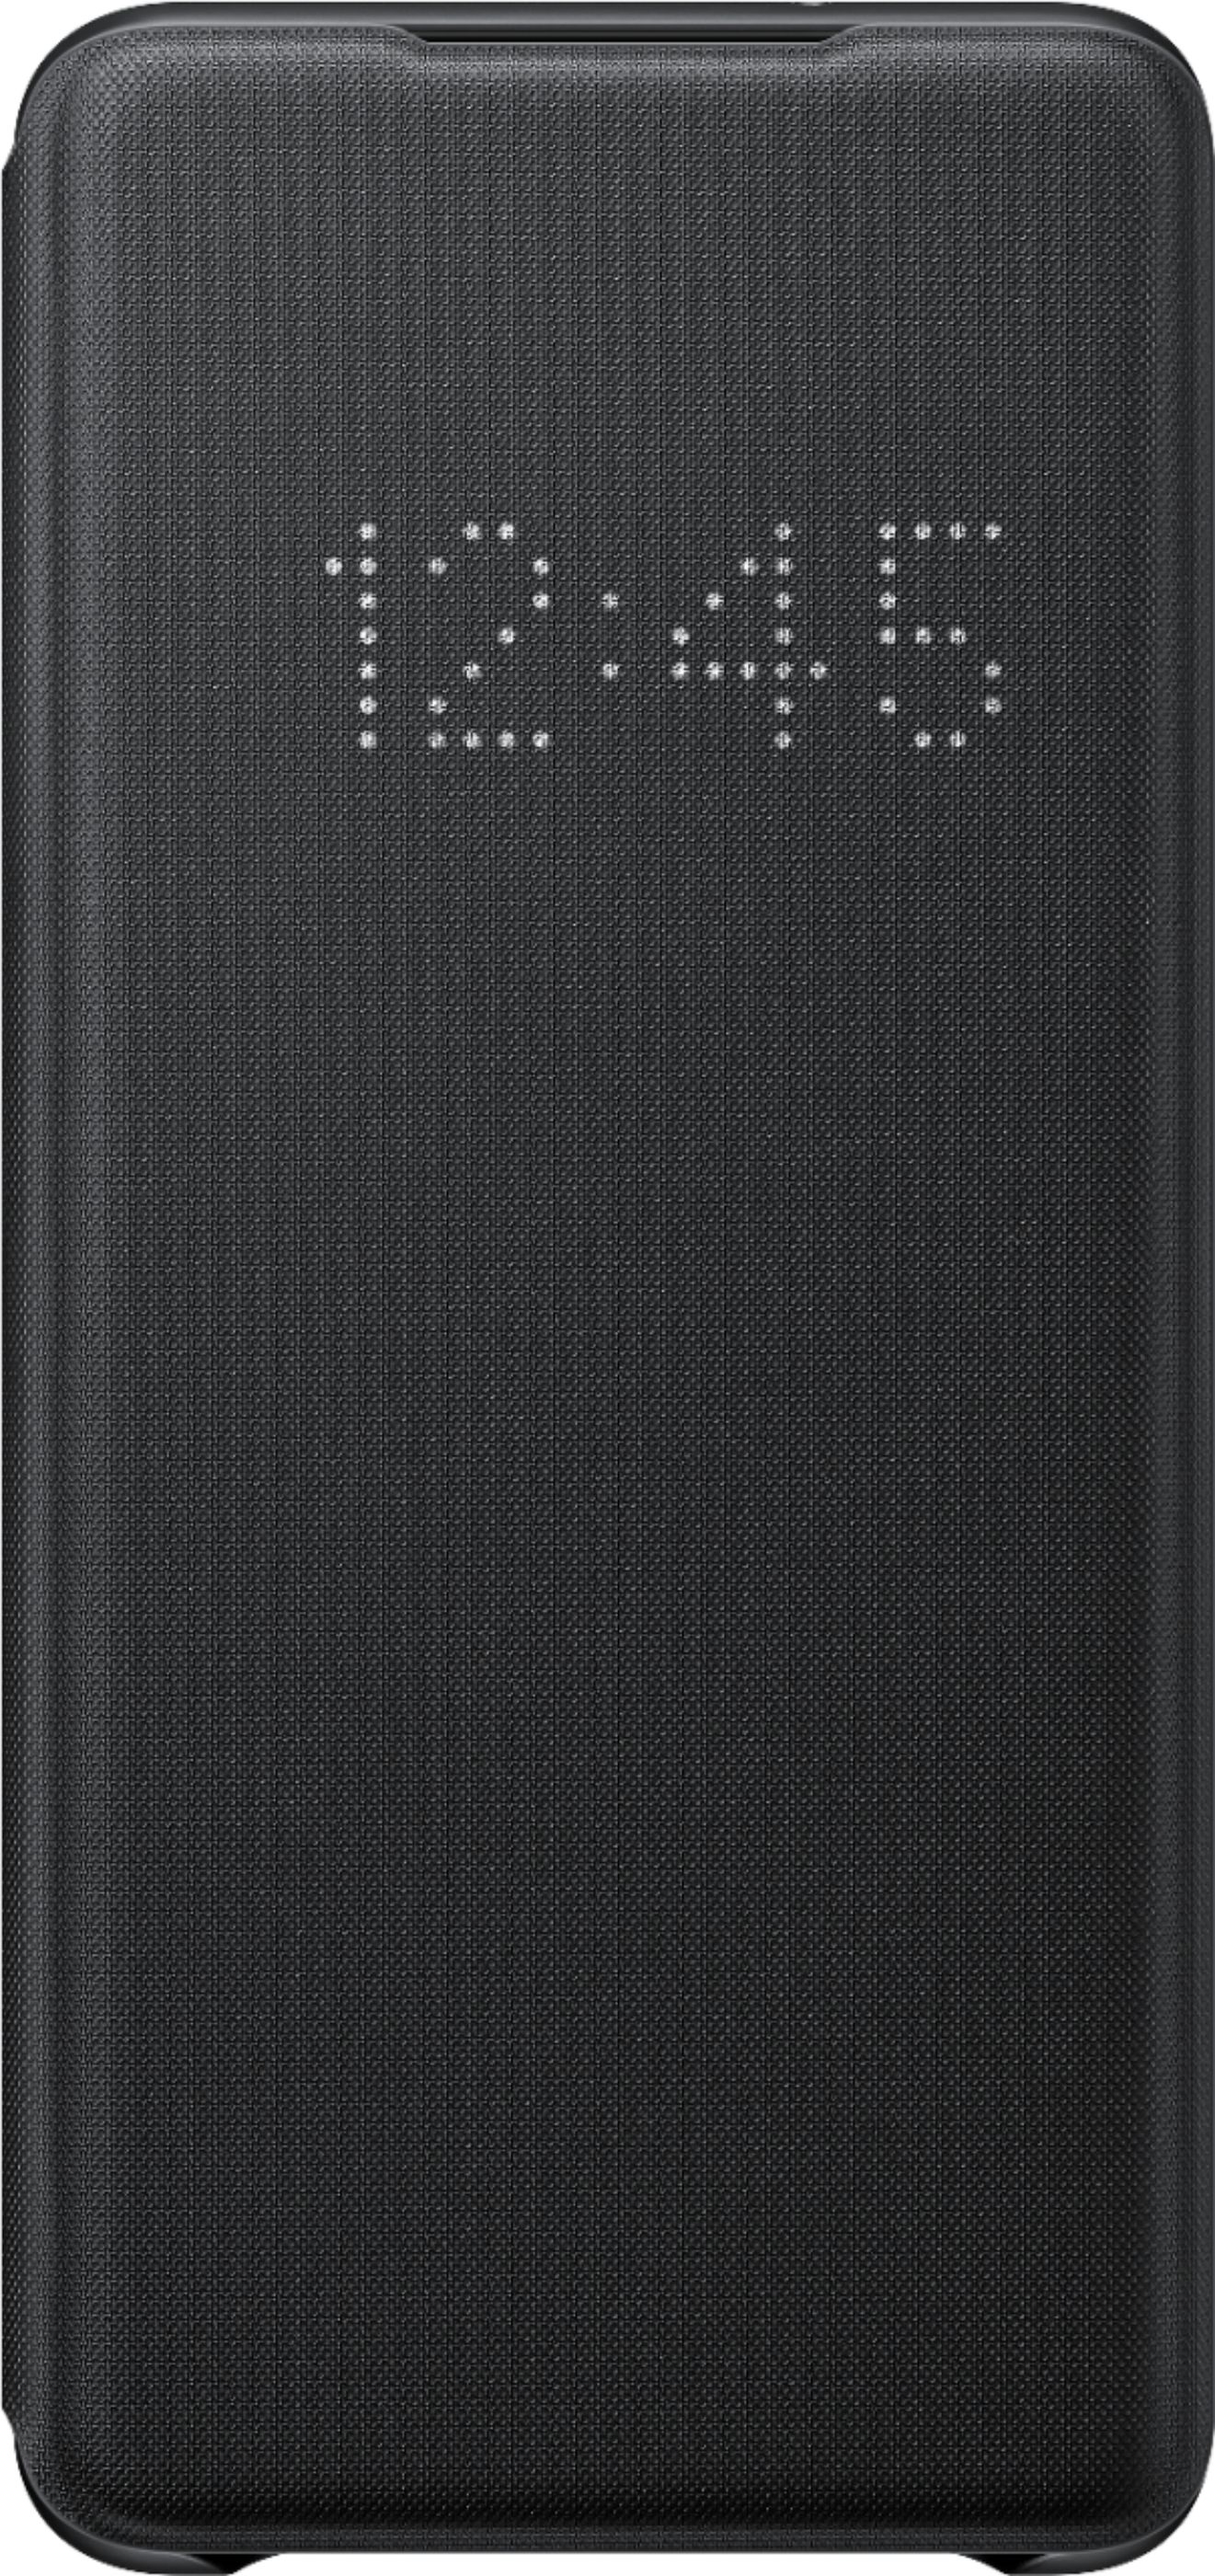 LED Wallet Cover Case for Samsung Galaxy S20+ 5G or Note 20 5G $22.99 open box at Best Buy